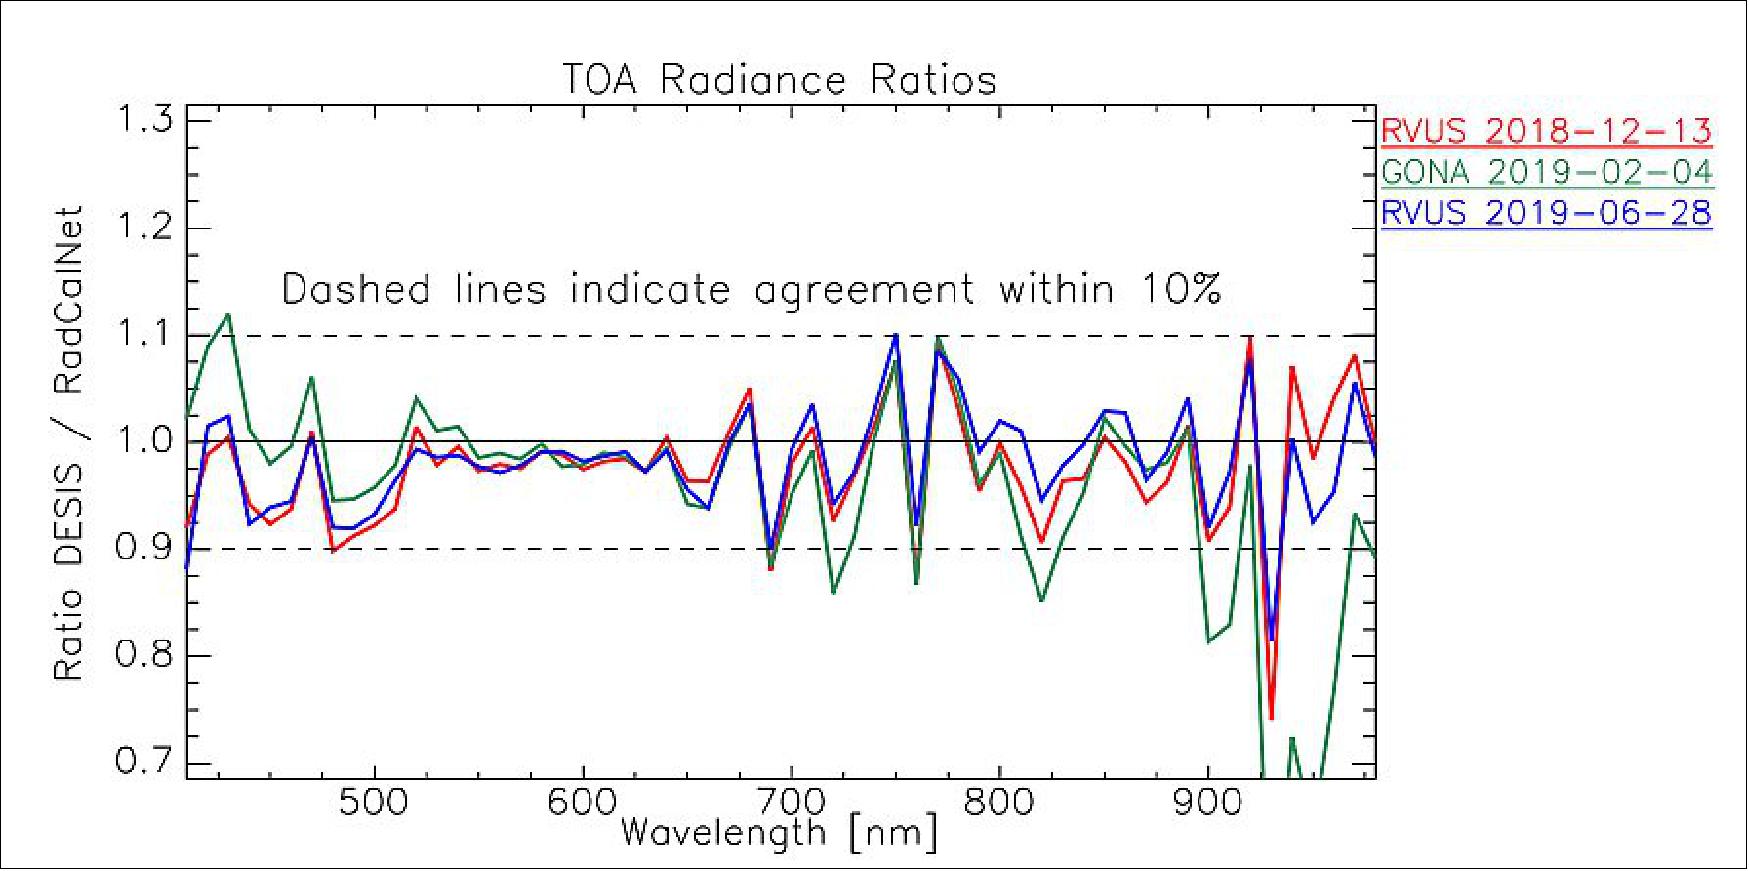 Figure 15: Ratio of mean DESIS TOA-L and corresponding RadCalNet data for all 3 sites, at RadCalNet spectral resolution (image credit: DLR, TBE)